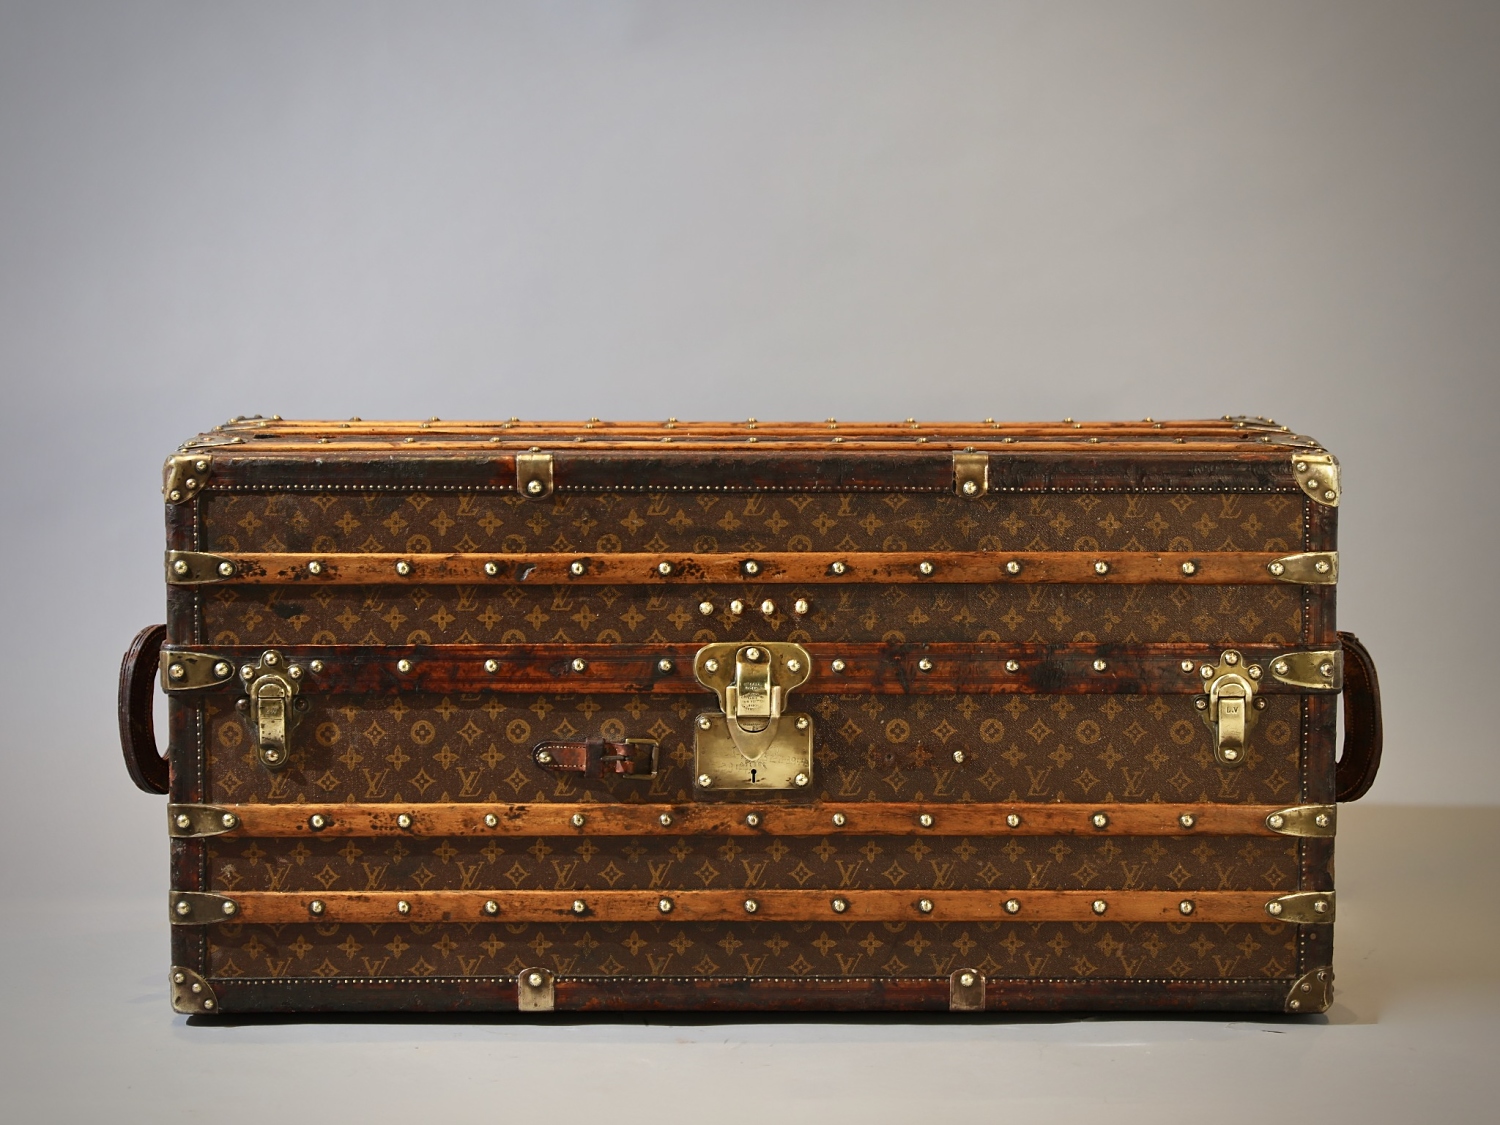 the-well-traveled-trunk-louis-vuitton-thumbnail-product-5698-1